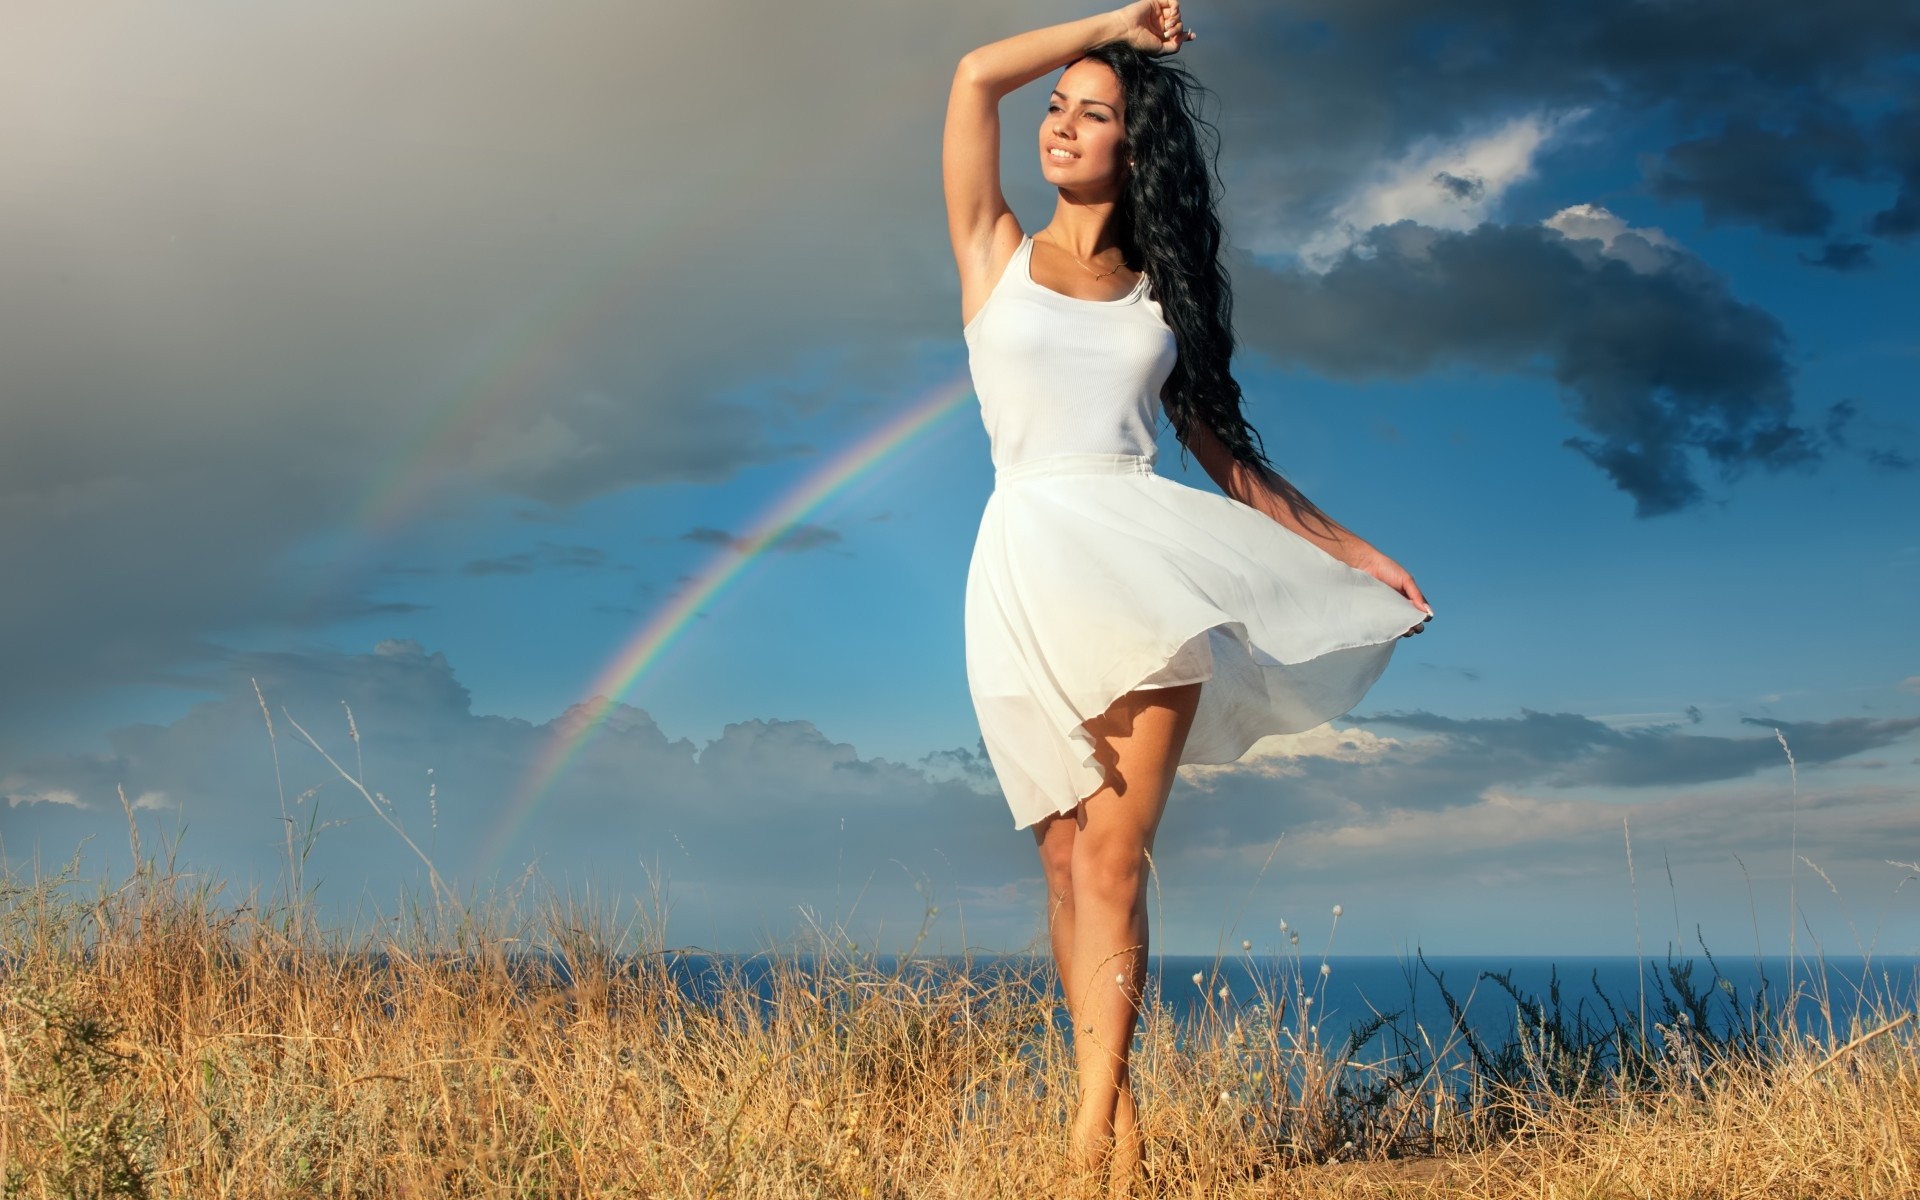 People 1920x1200 women model long hair women outdoors dress smiling sea grass rainbows clouds barefoot outdoors standing black hair sky summer dress looking into the distance arms up